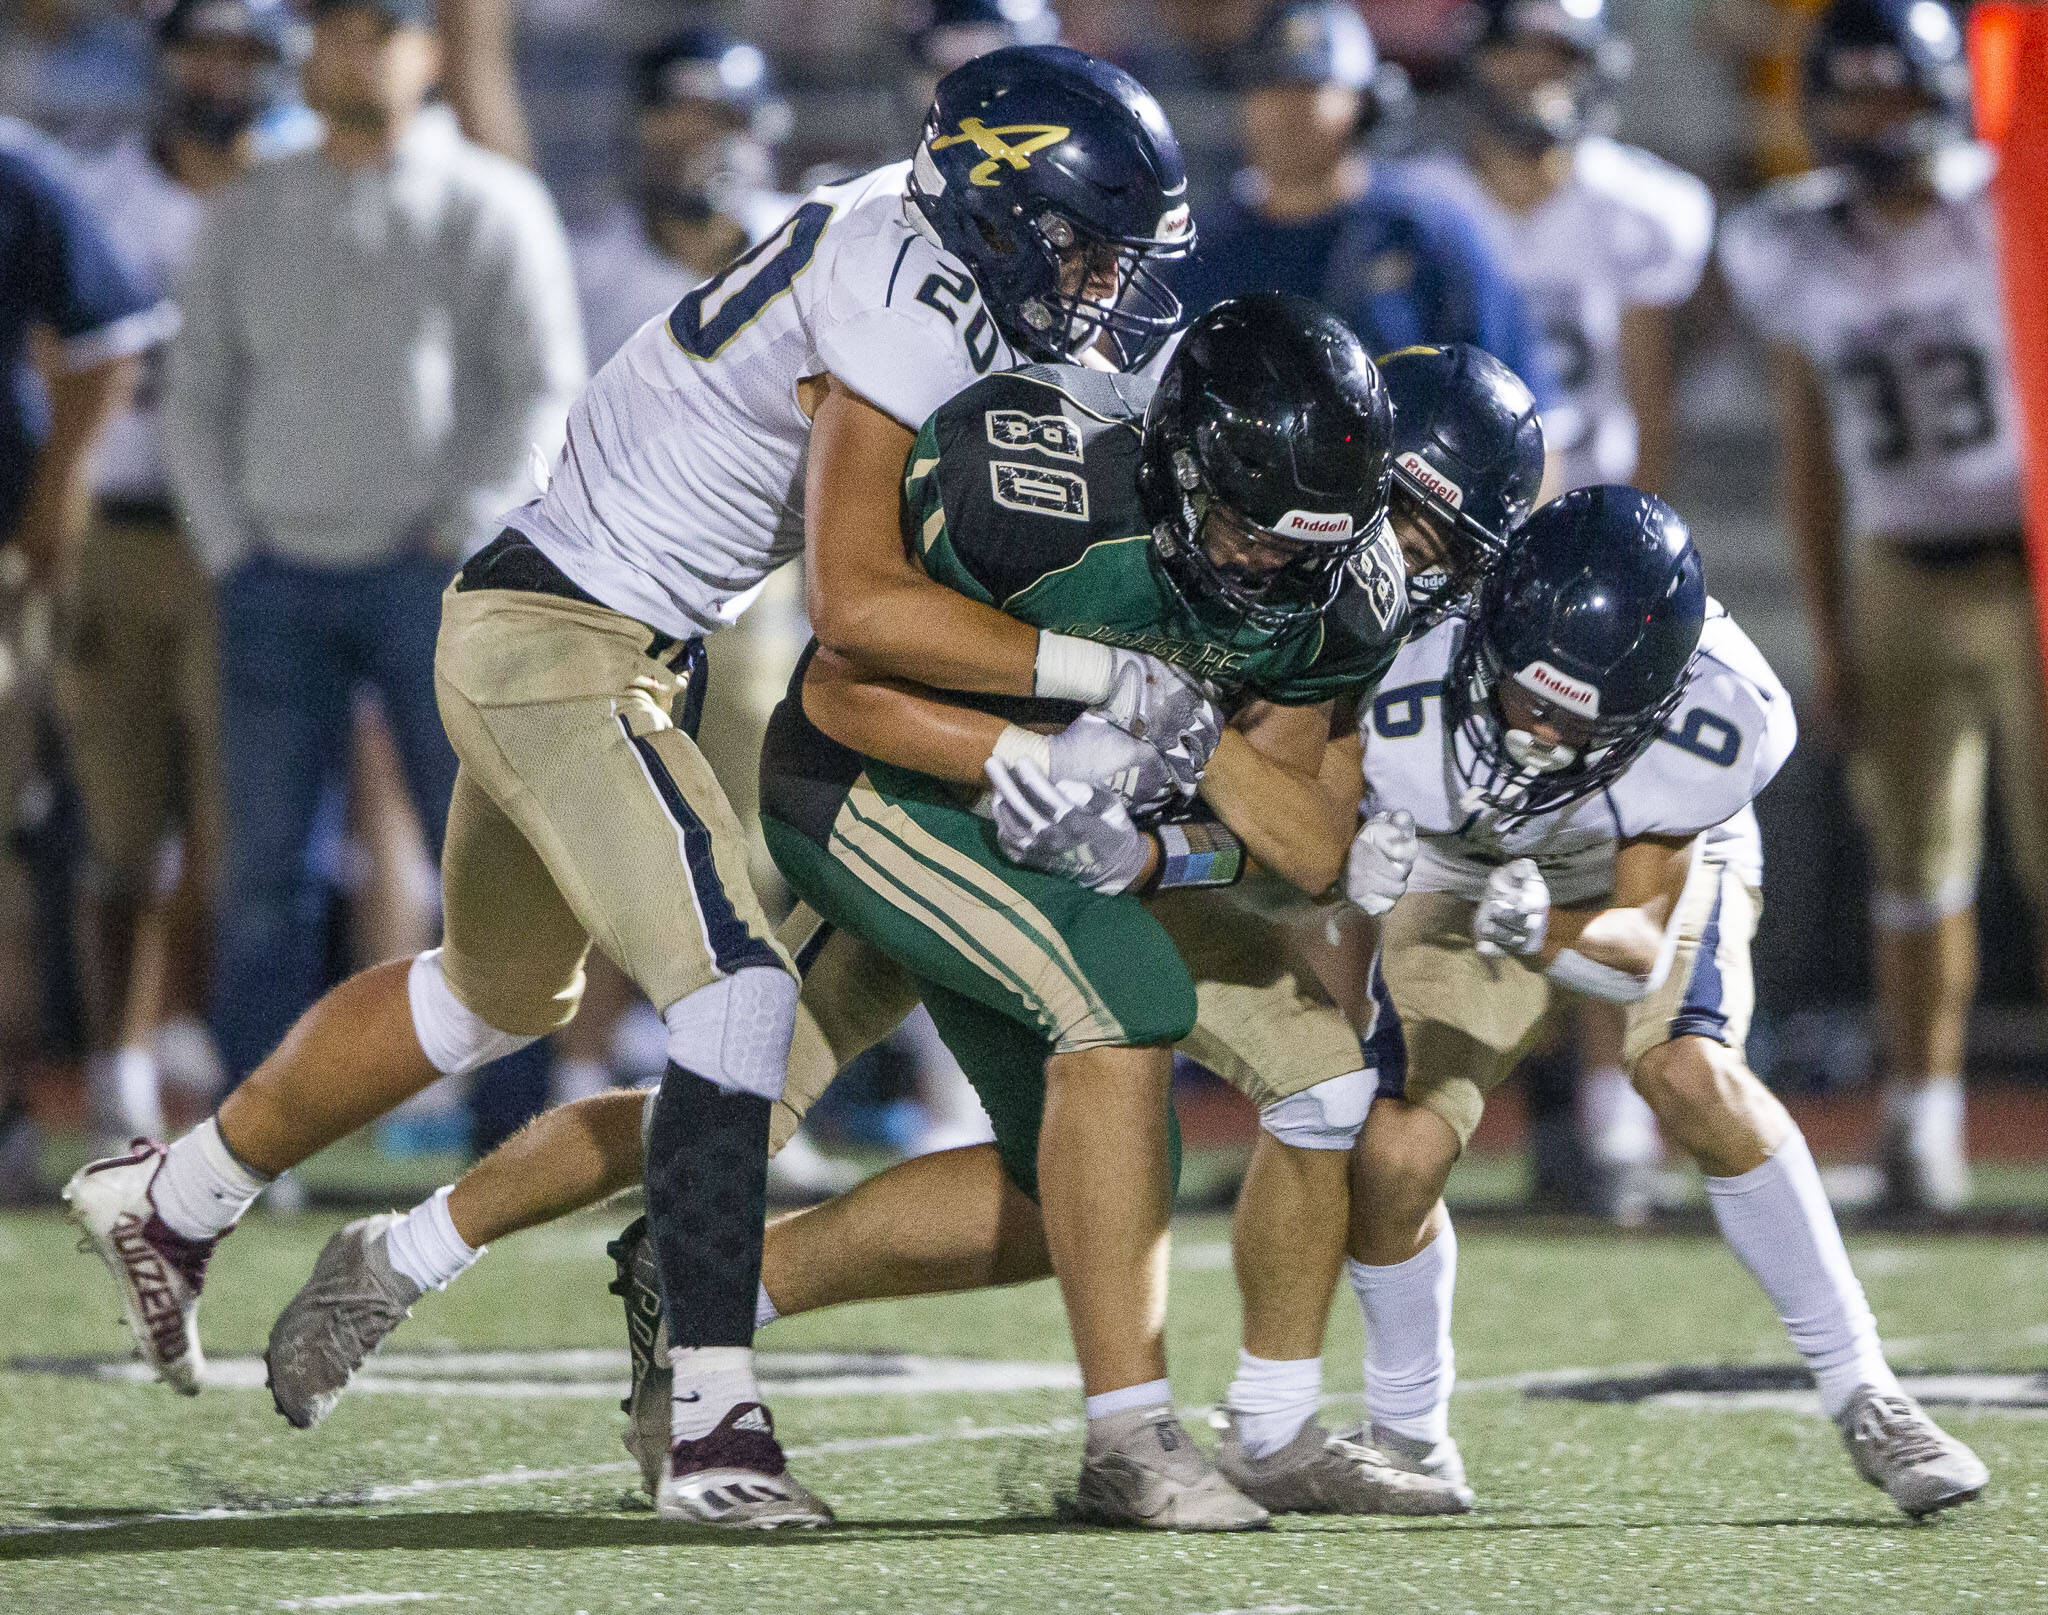 Marysville Getchell’s Wyatt Harris is tackled by multiple Arlington players during the game on Friday, Sept. 9, 2022 in Marysville, Washington. (Olivia Vanni / The Herald)